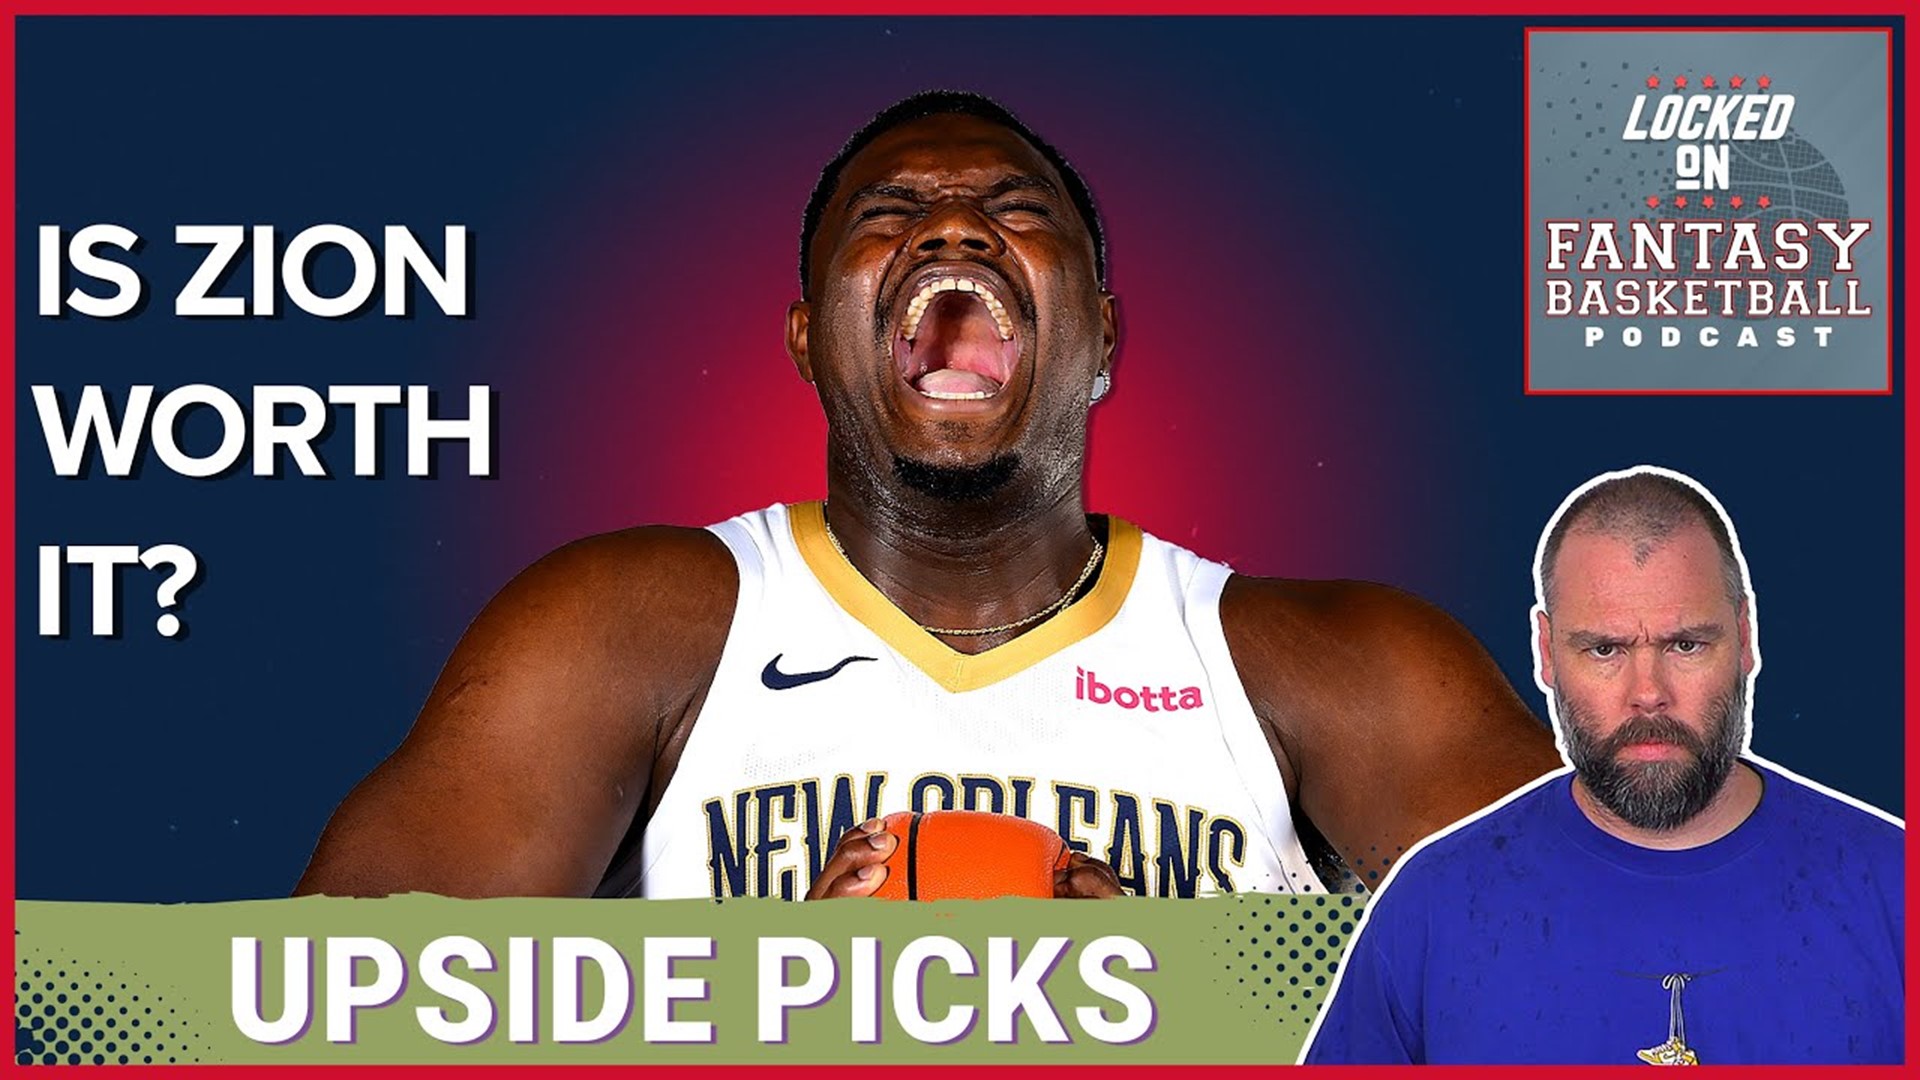 In this episode, Josh Lloyd brings you an unmissable guide on choosing high-upside picks in each round of your fantasy basketball draft.